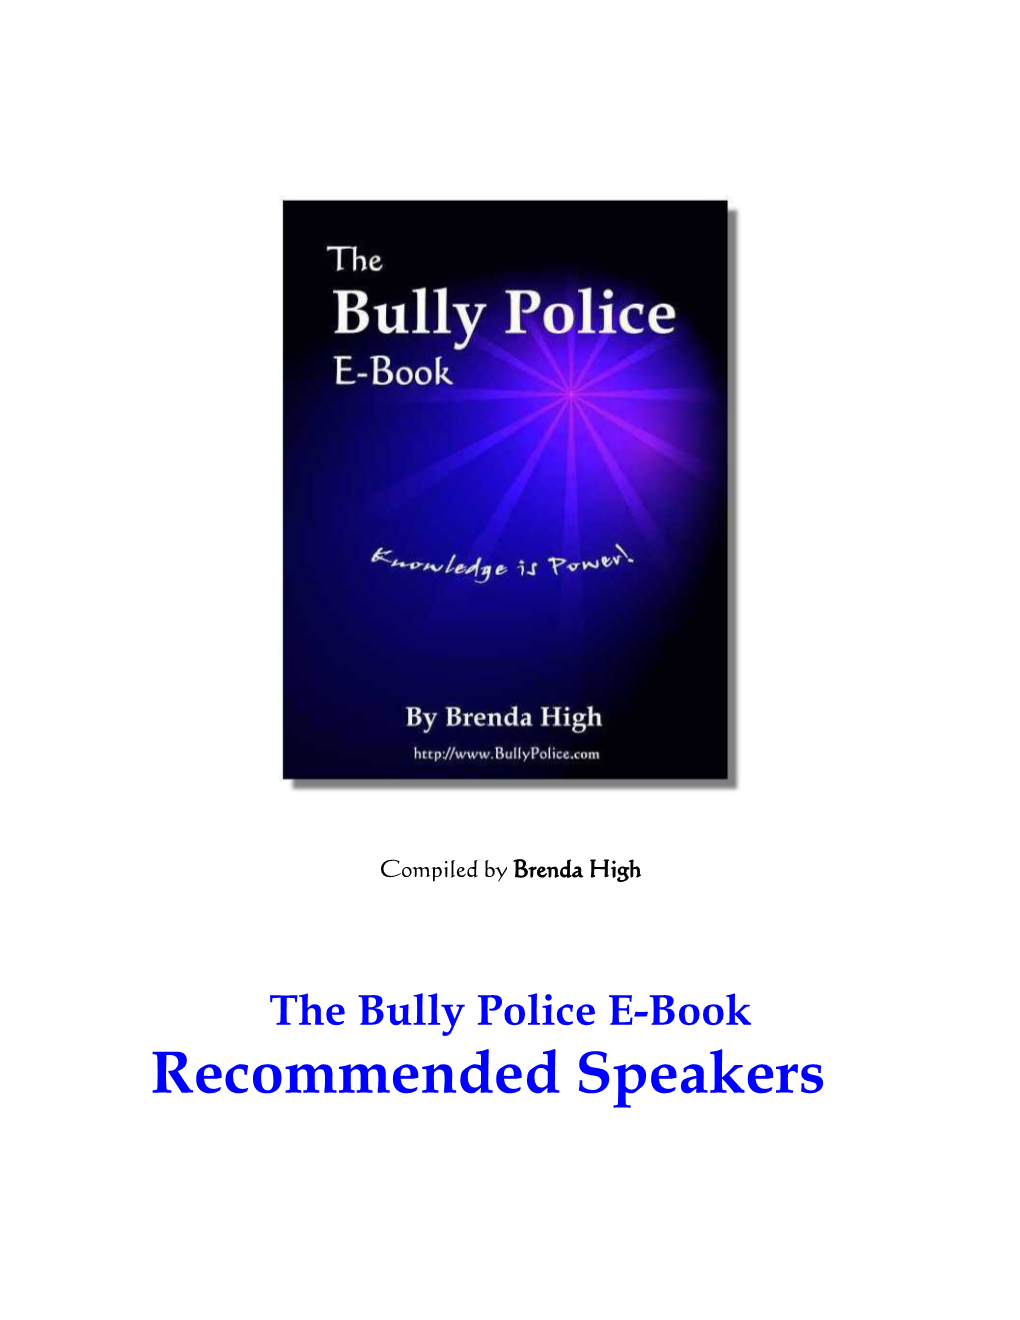 Recommended Speakers